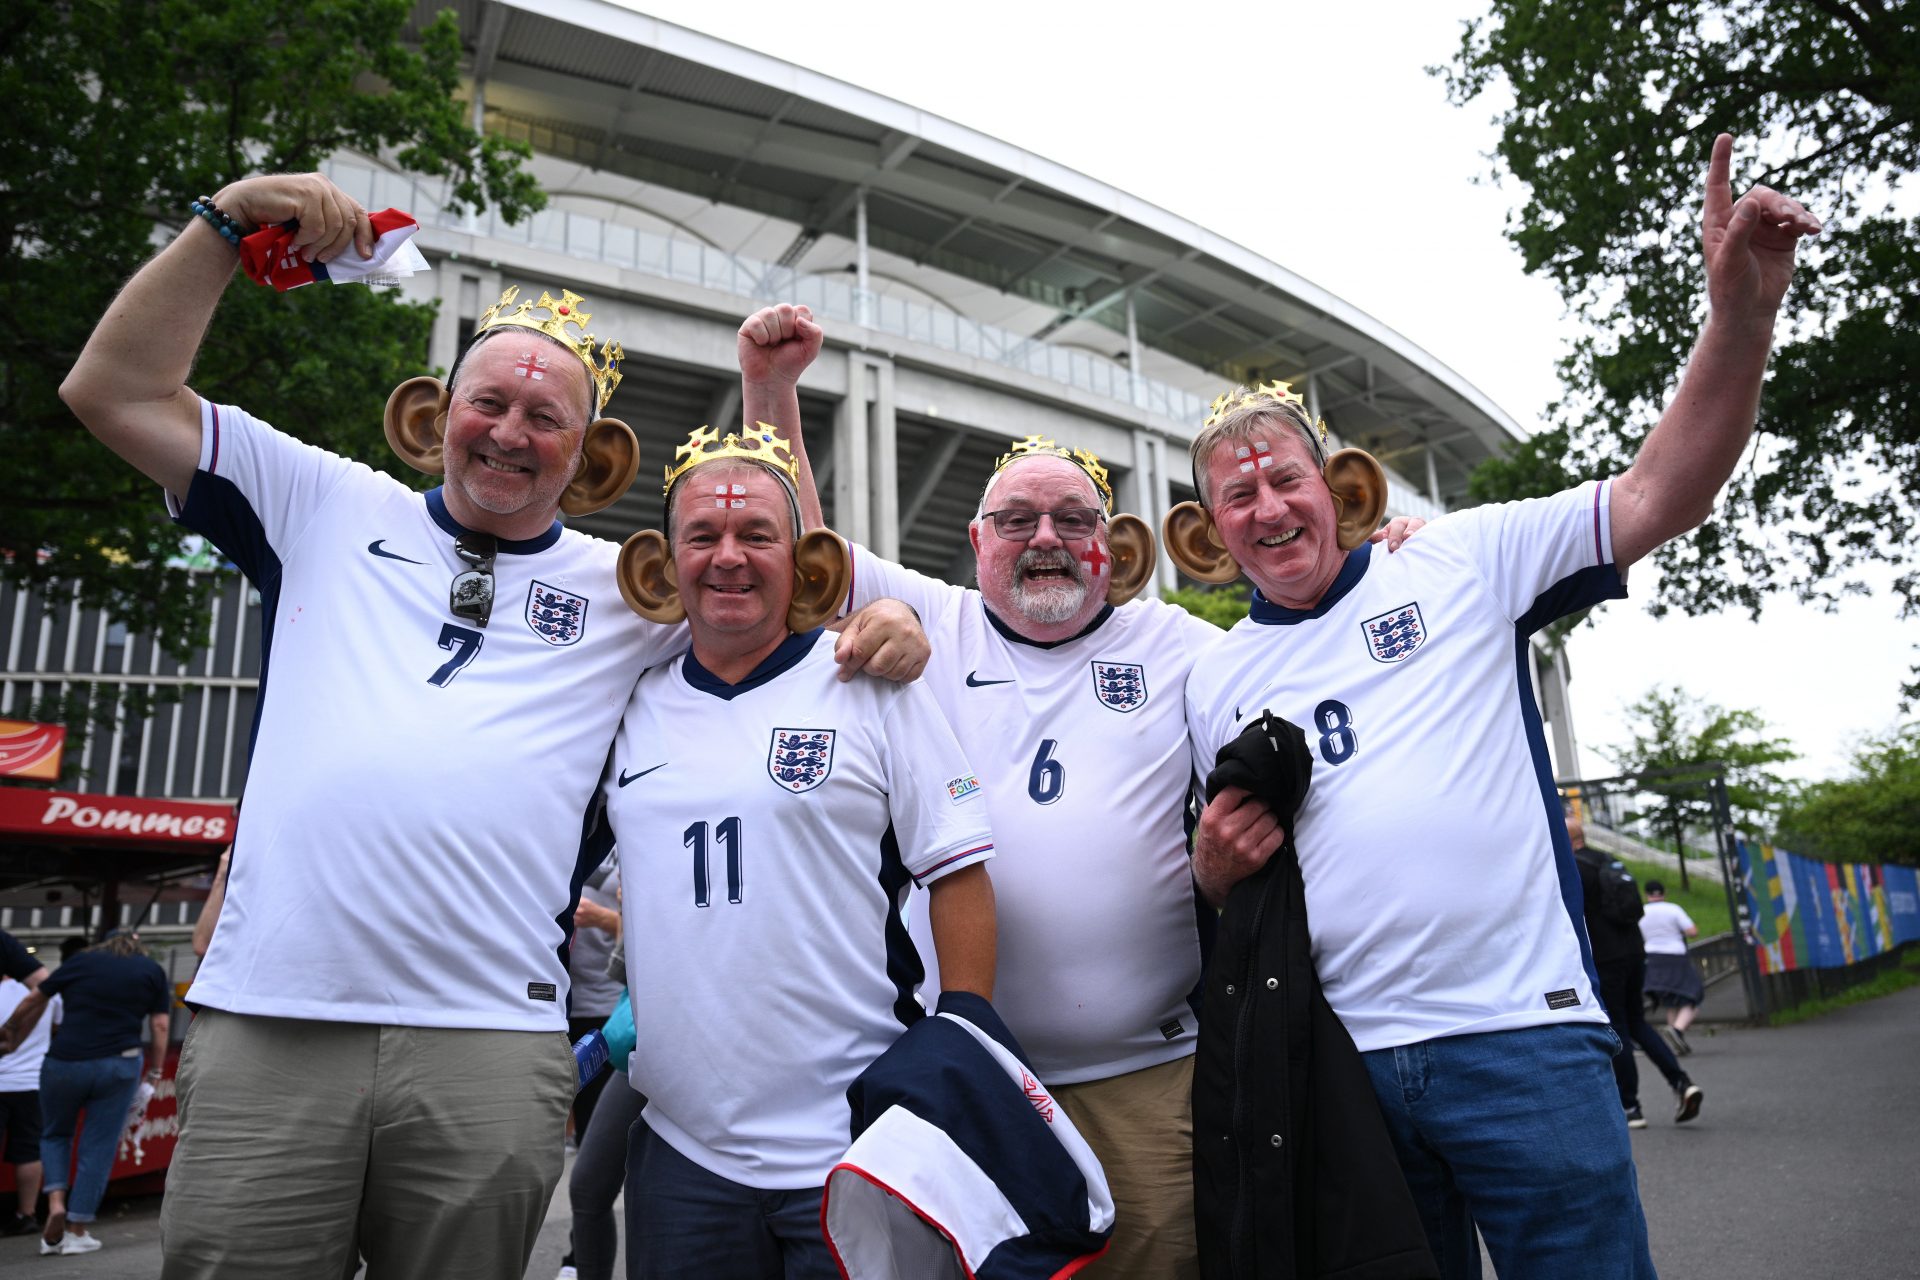 England fans praised for 'exuberant atmosphere' against Denmark following violence with Serbs